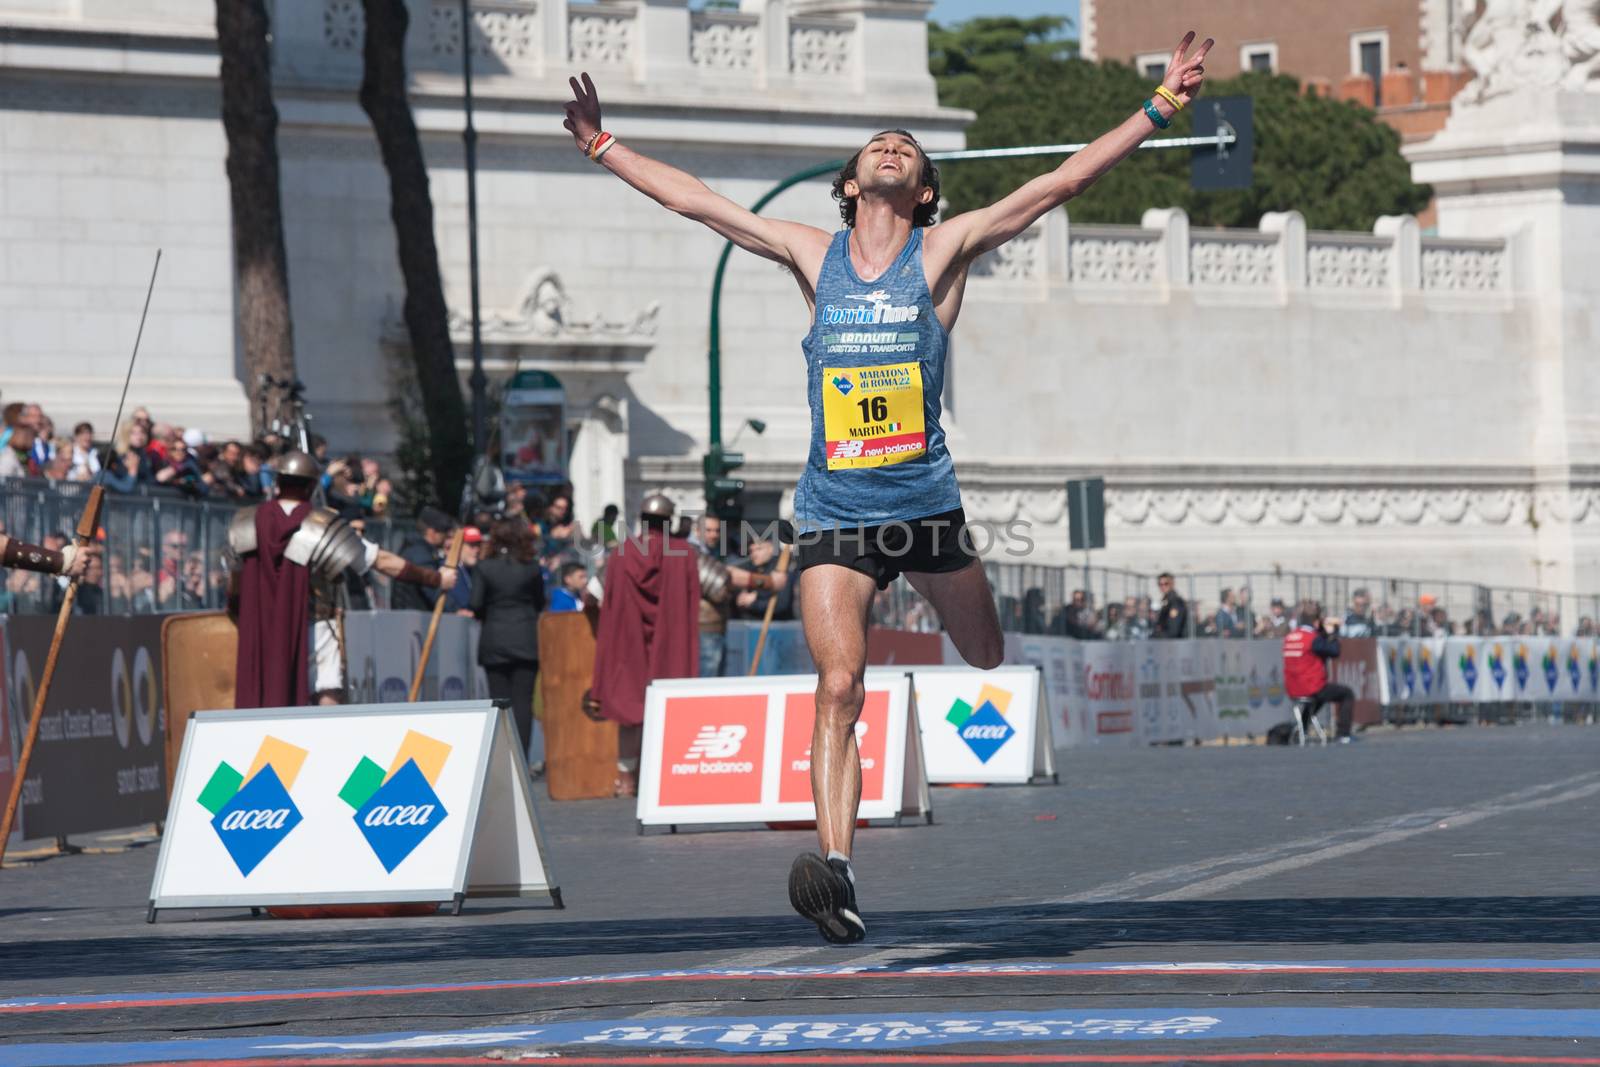 ITALY, Rome: Italian runner Martin DeMatteis crosses the finish line of Rome City Marathon in Rome on April 10, 2016. He was the first Italian athlete to cross the finish line.